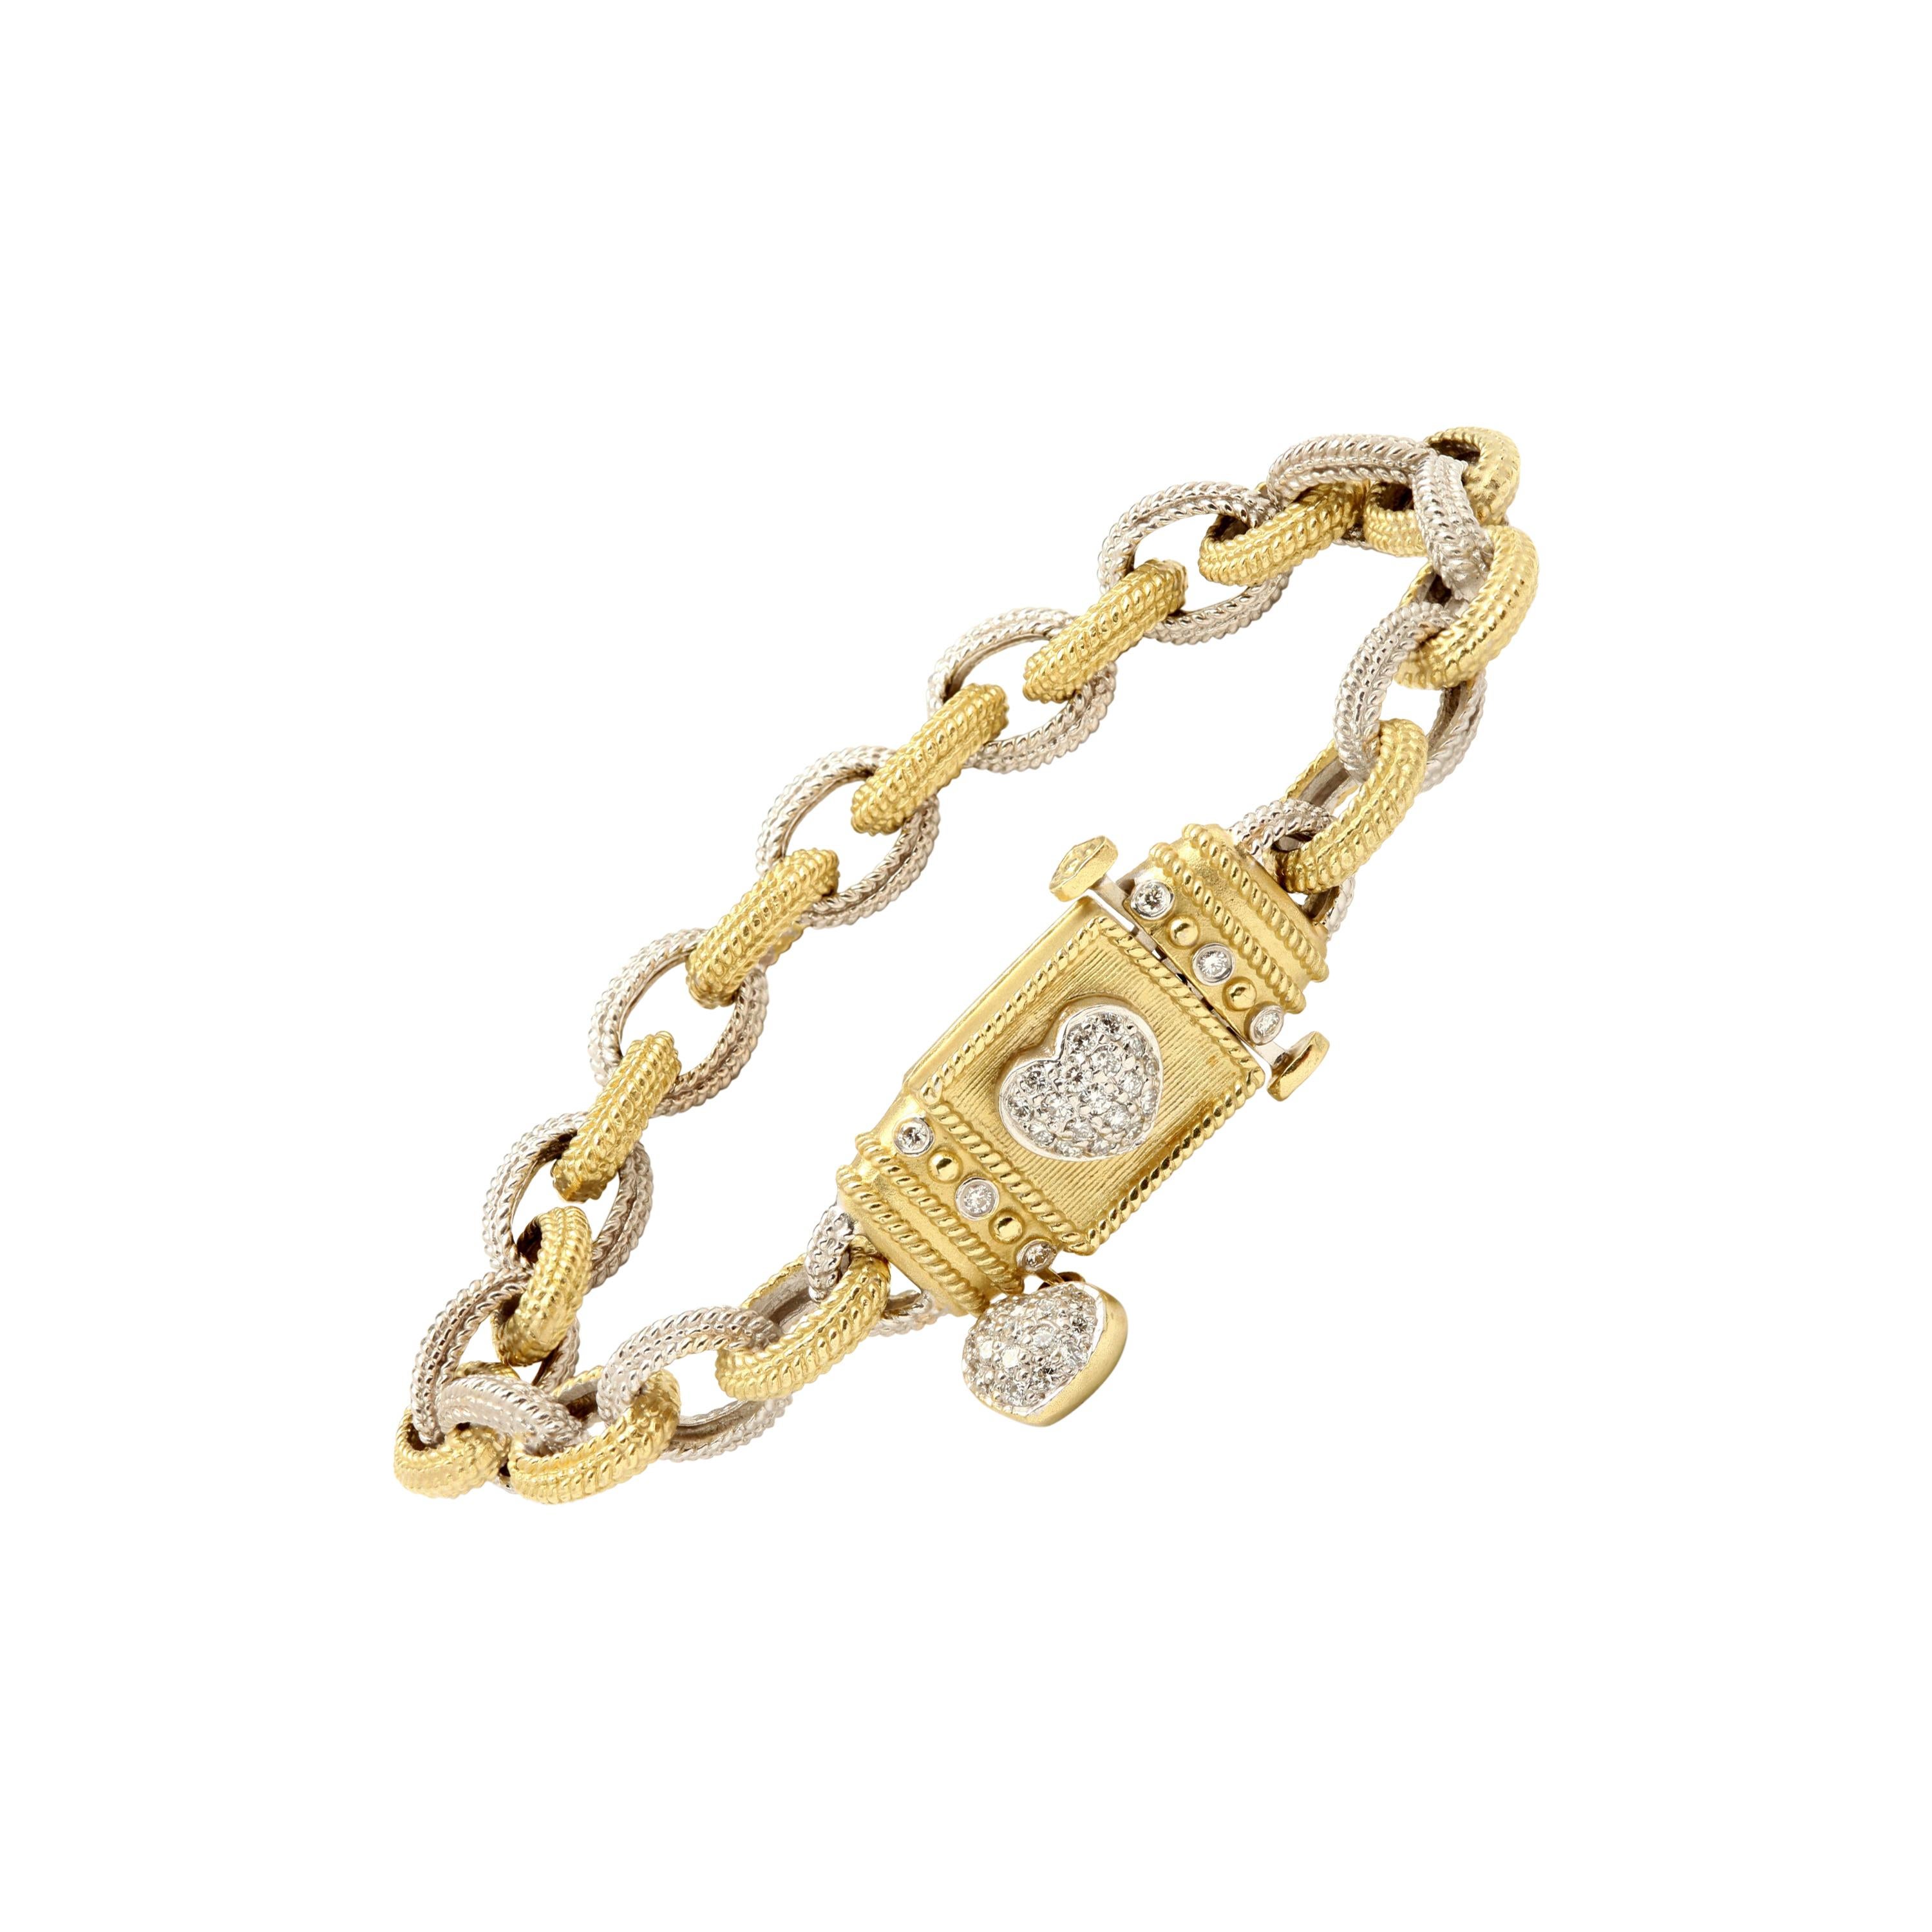 Two-Tone Yellow White Gold and Diamond Link Bracelet with Hearts Stambolian